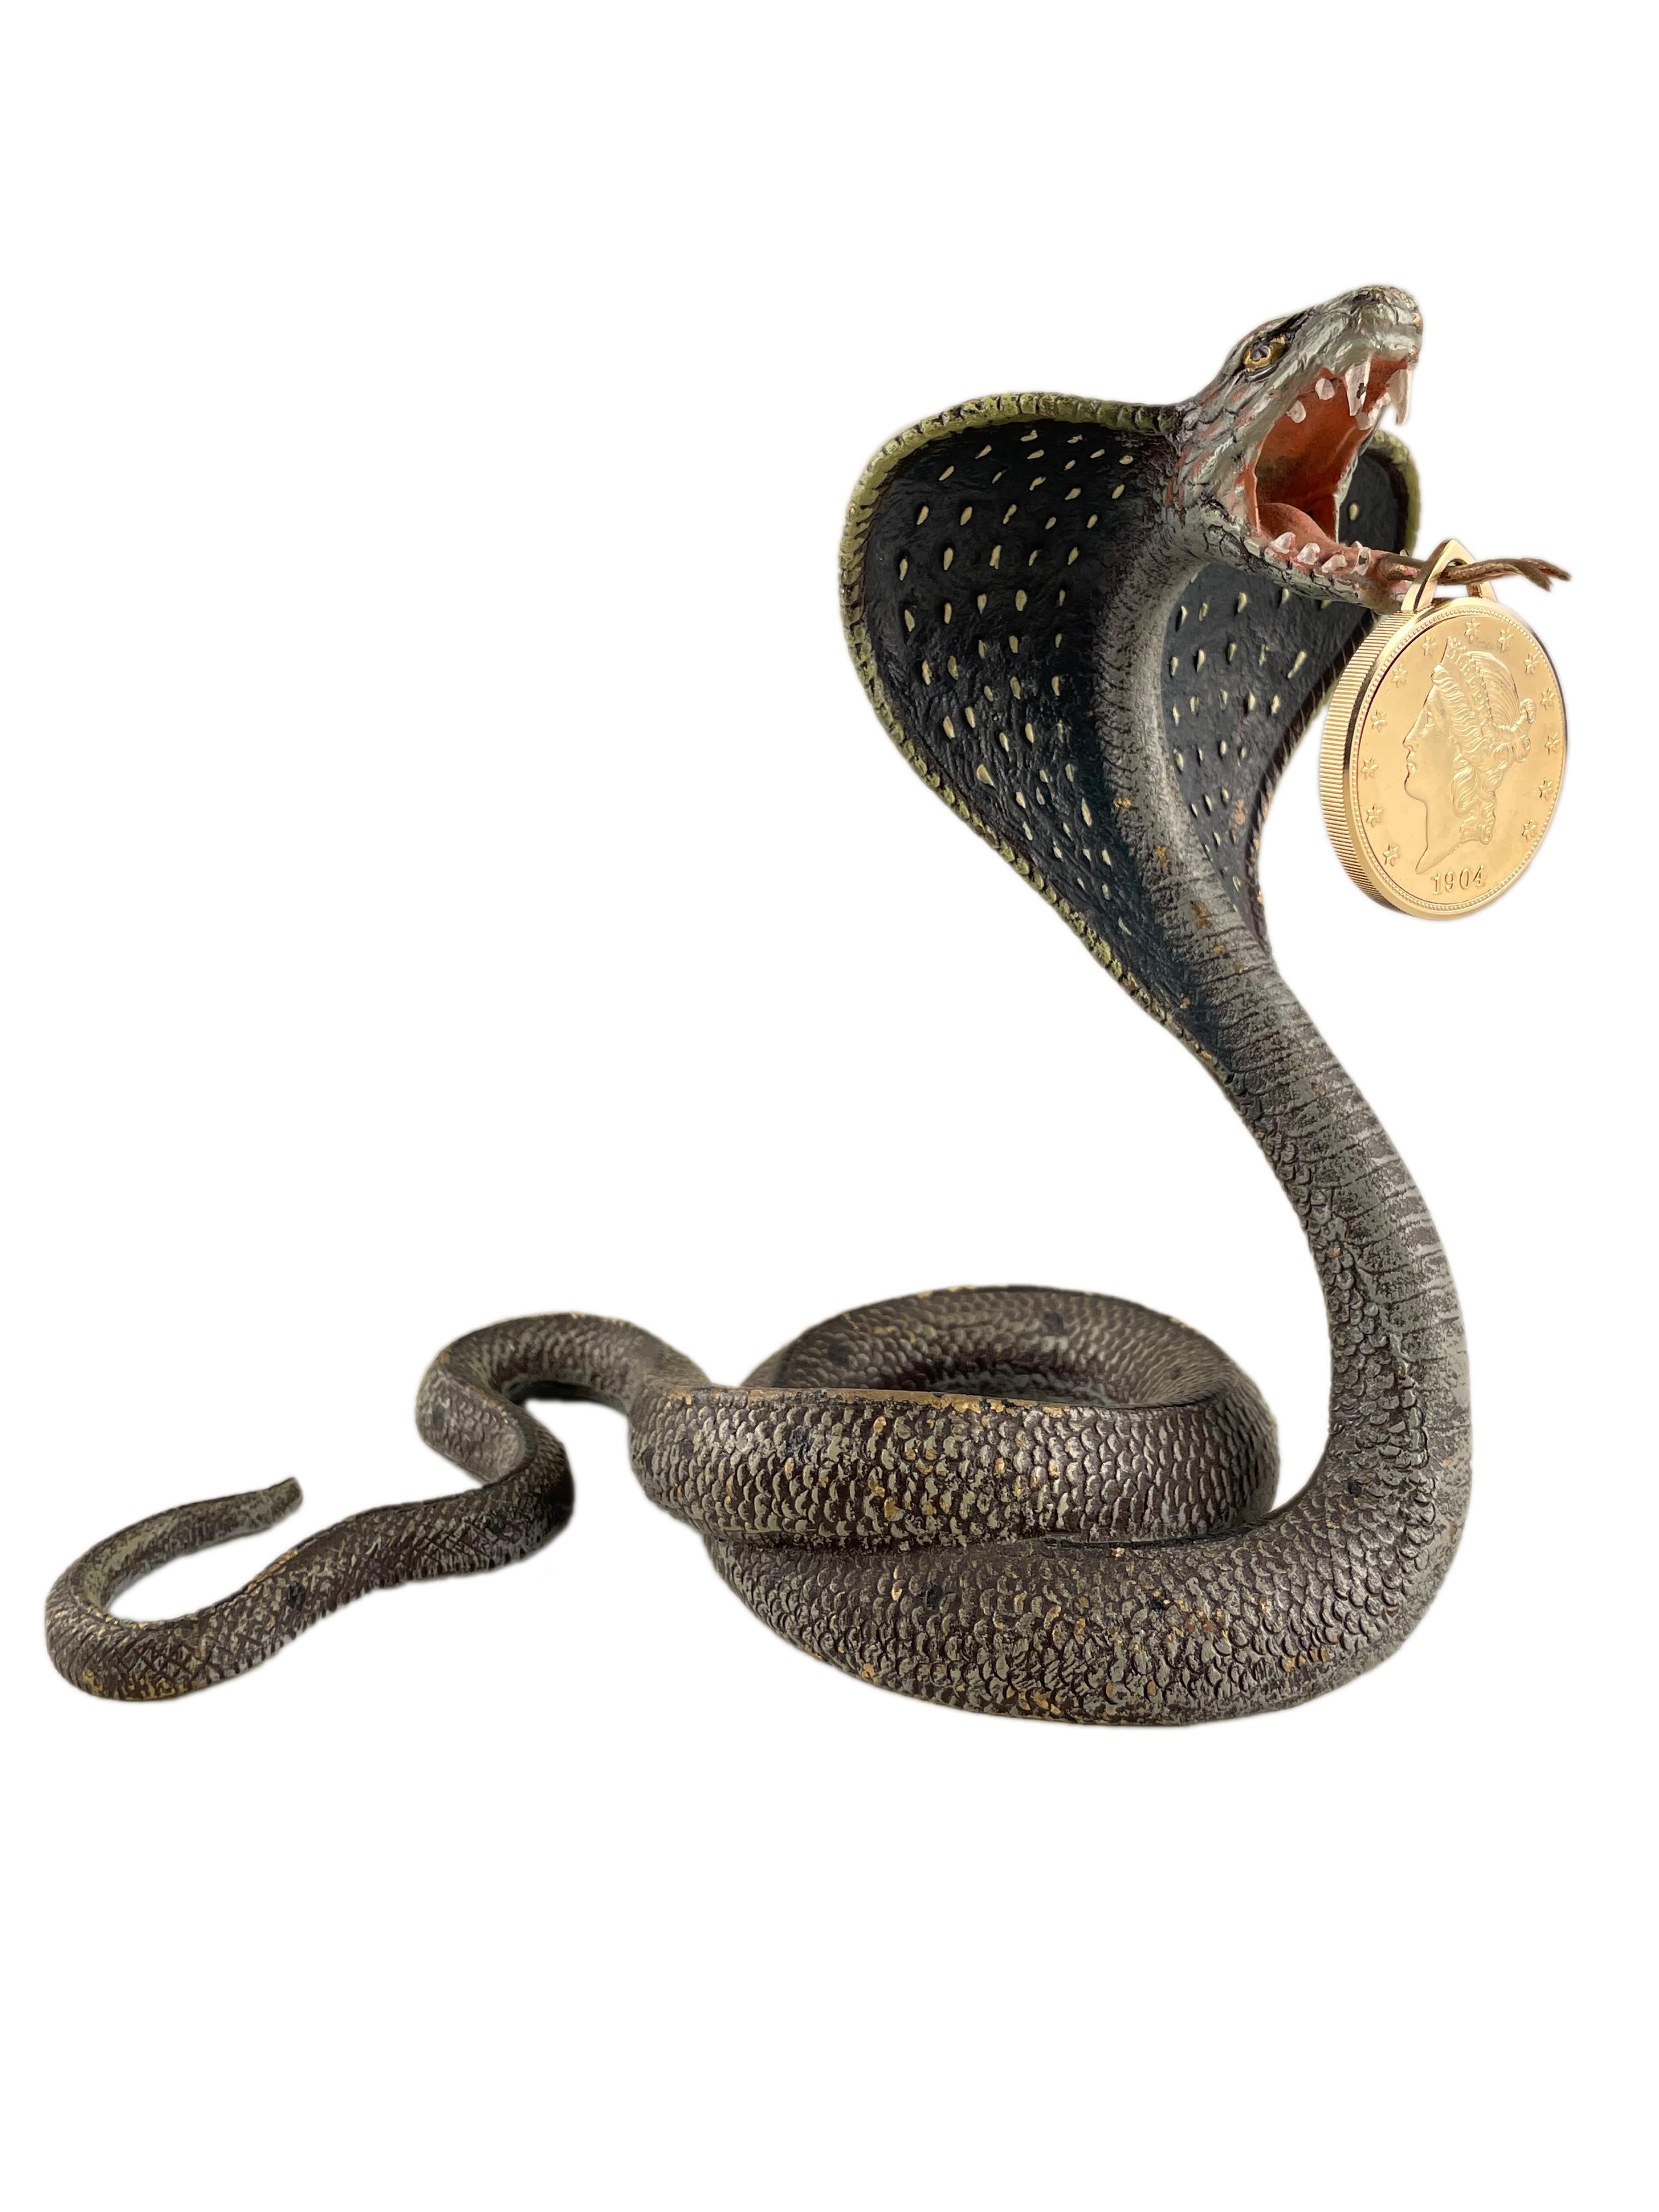 An early 20th century Austrian/Viennese Art Nouveau realistic cold-painted bronze of a cobra snake coiled with its head fanned out and tongue extended outwards. The tongue is long enough to intercept a pocket-watch as photographed. The bronze is